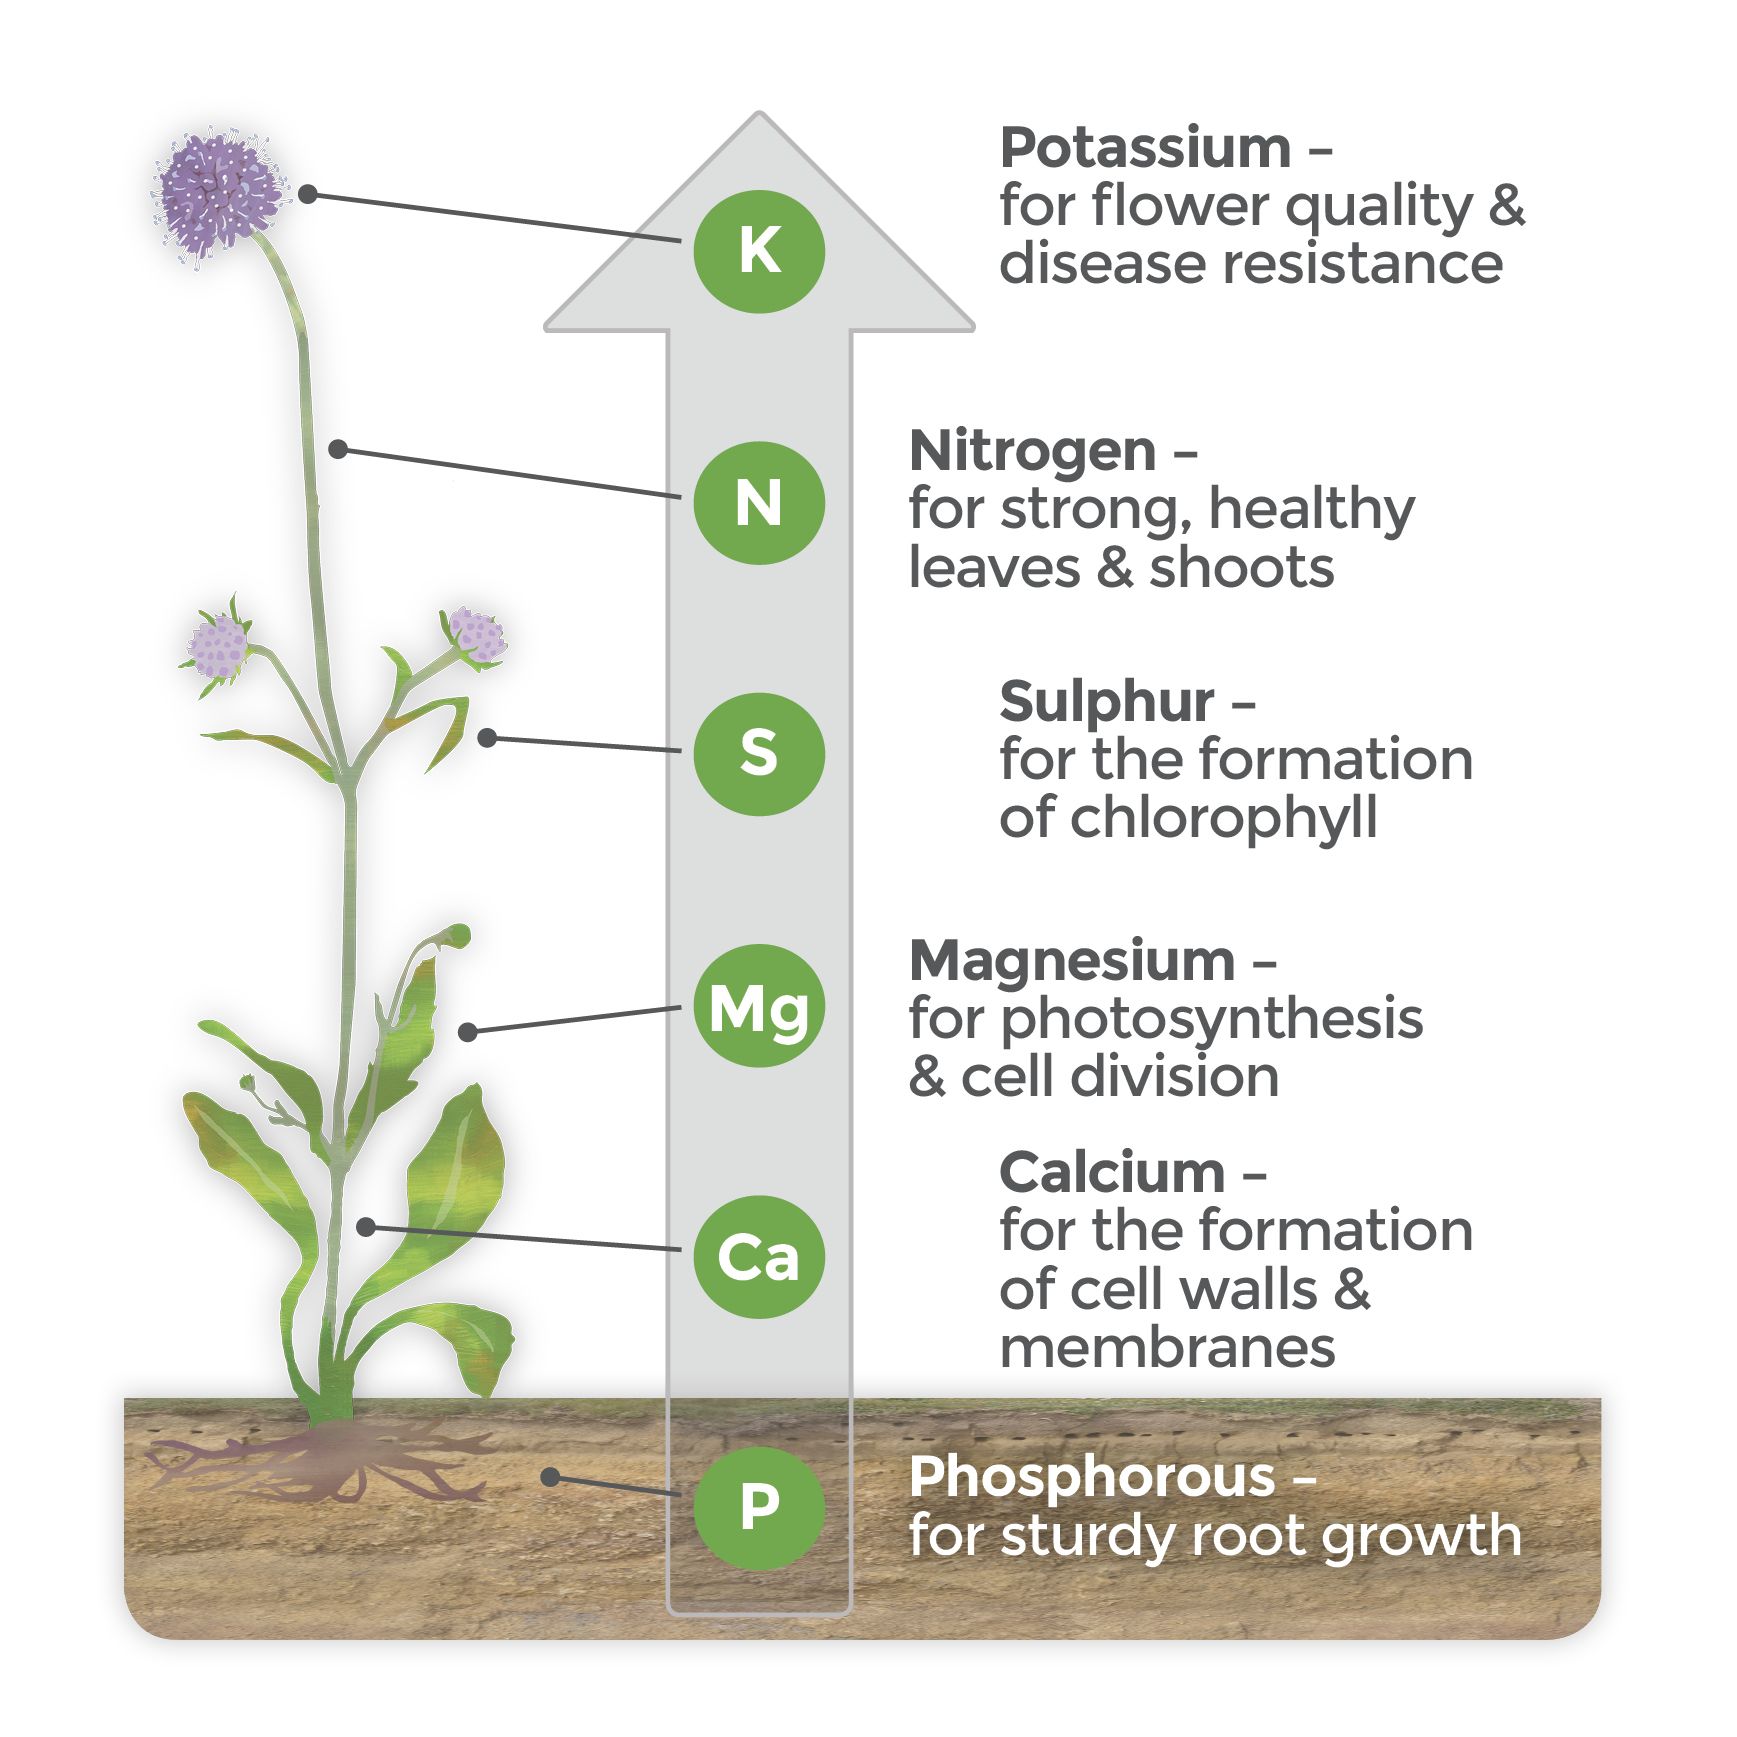 Diagram showing essential plant nutrients provided by soil (K, N, S, Mg, Ca, P)